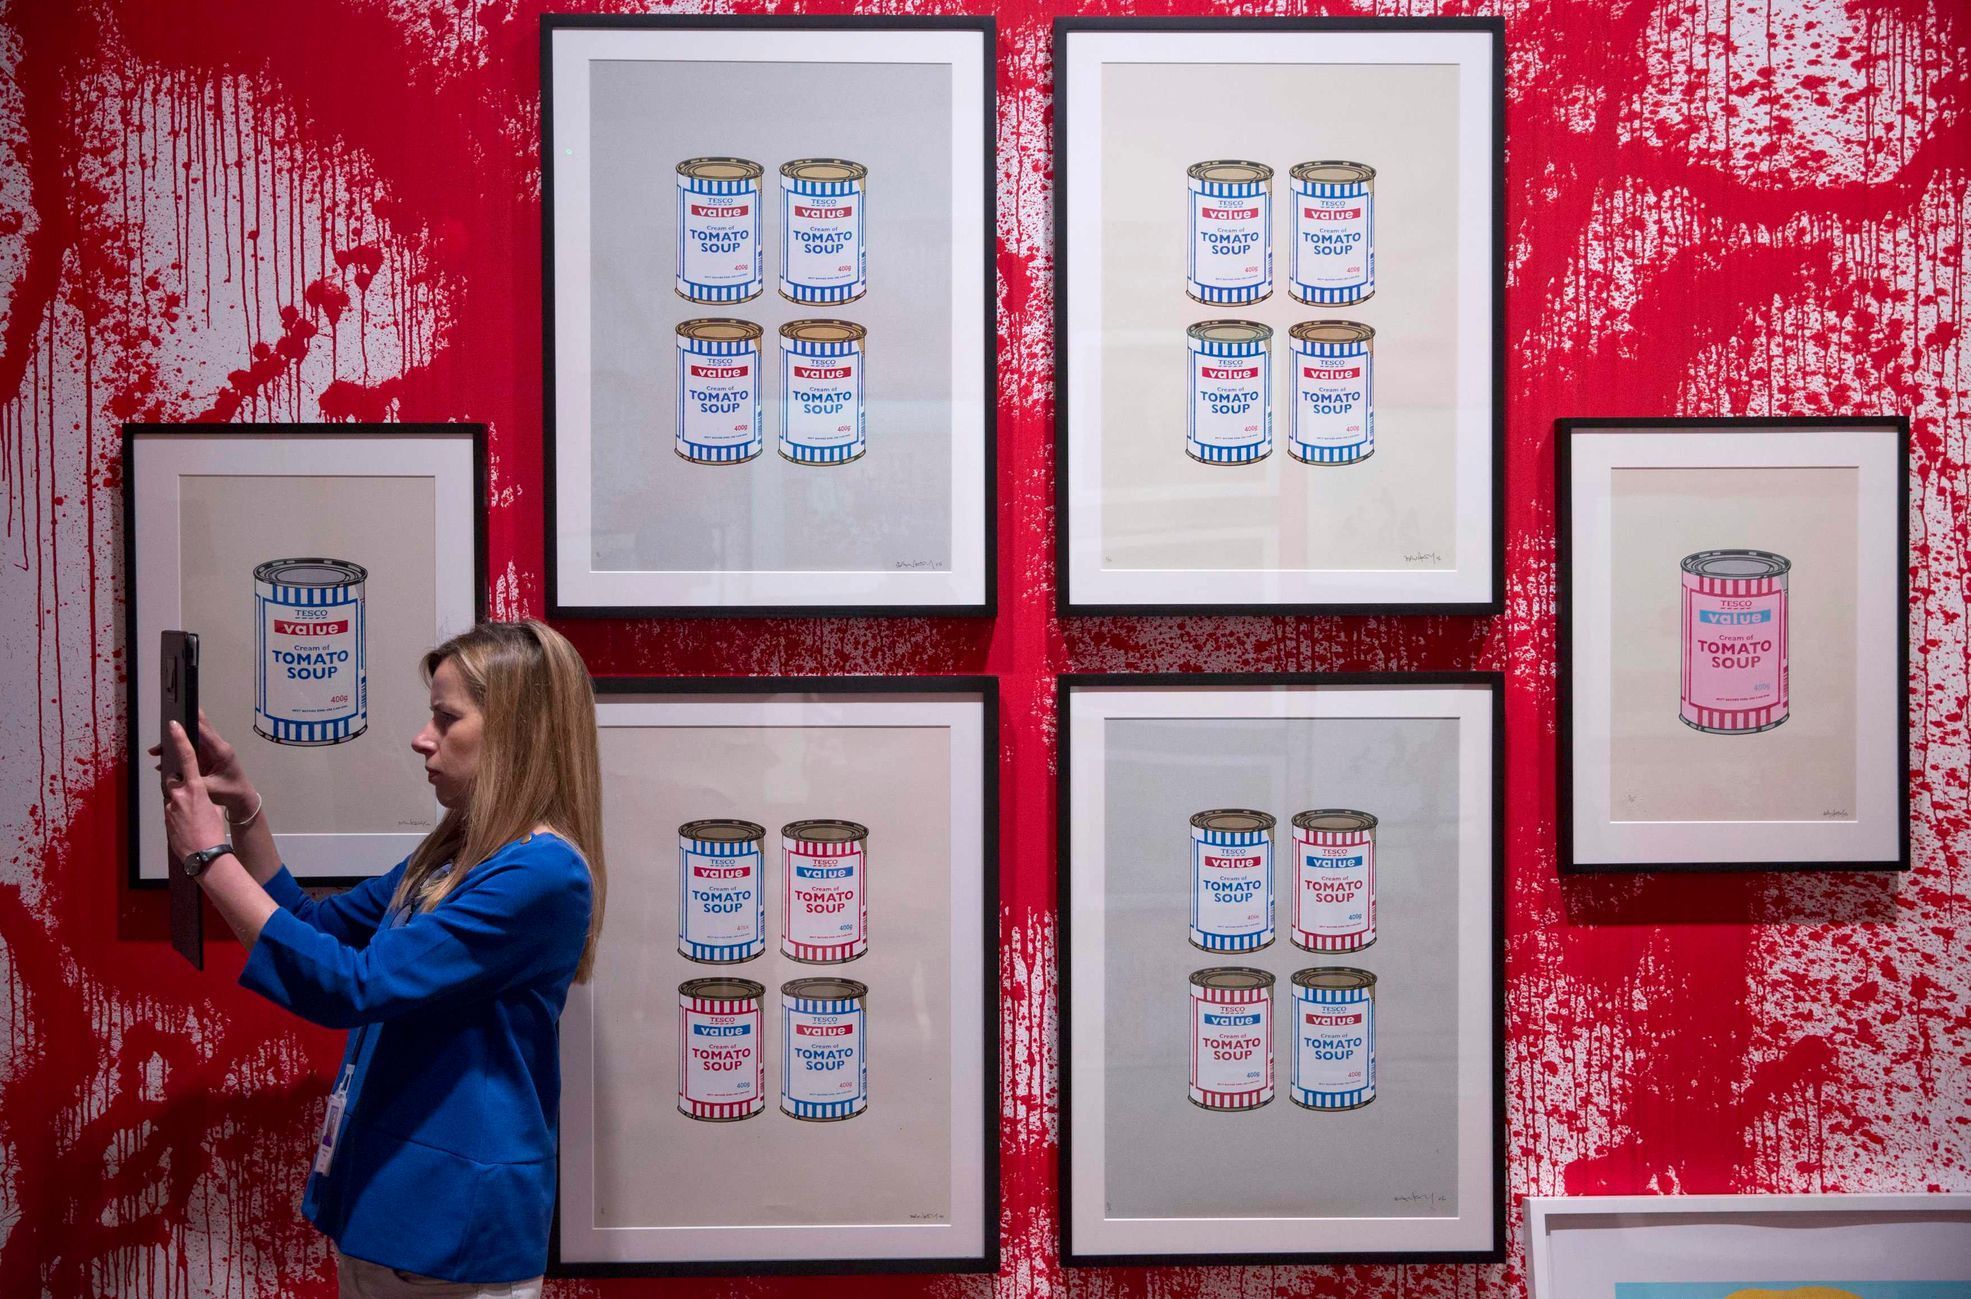 A woman takes a photograph at the Banksy: The Unauthorised Retrospective exhibition at Sotheby's S2 Gallery in London June